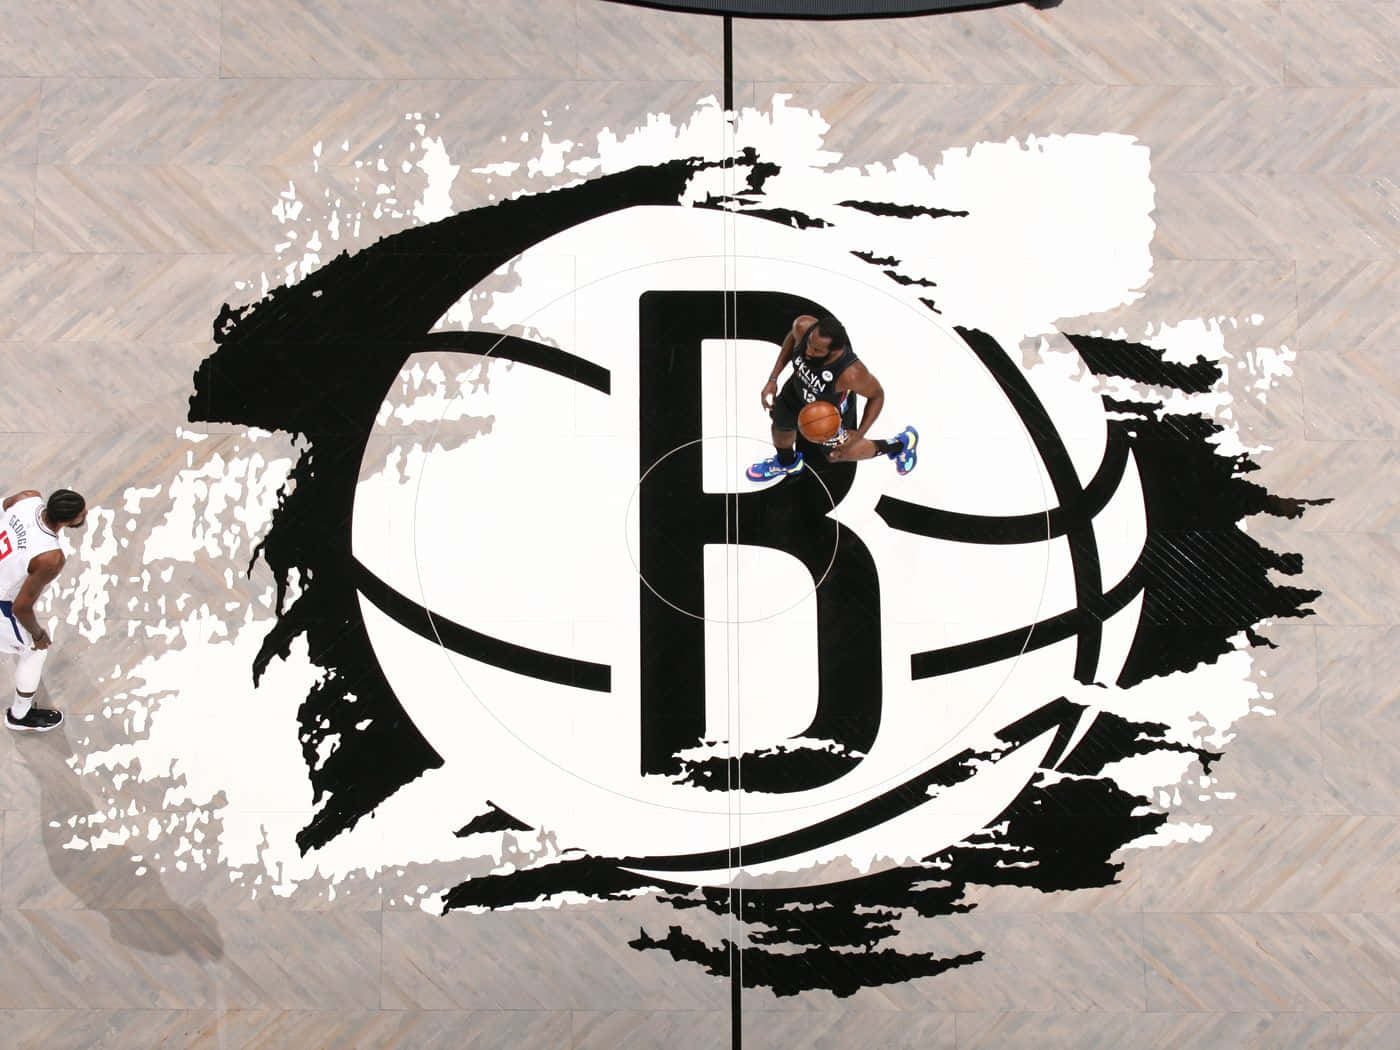 The Brooklyn Nets Go for the Win